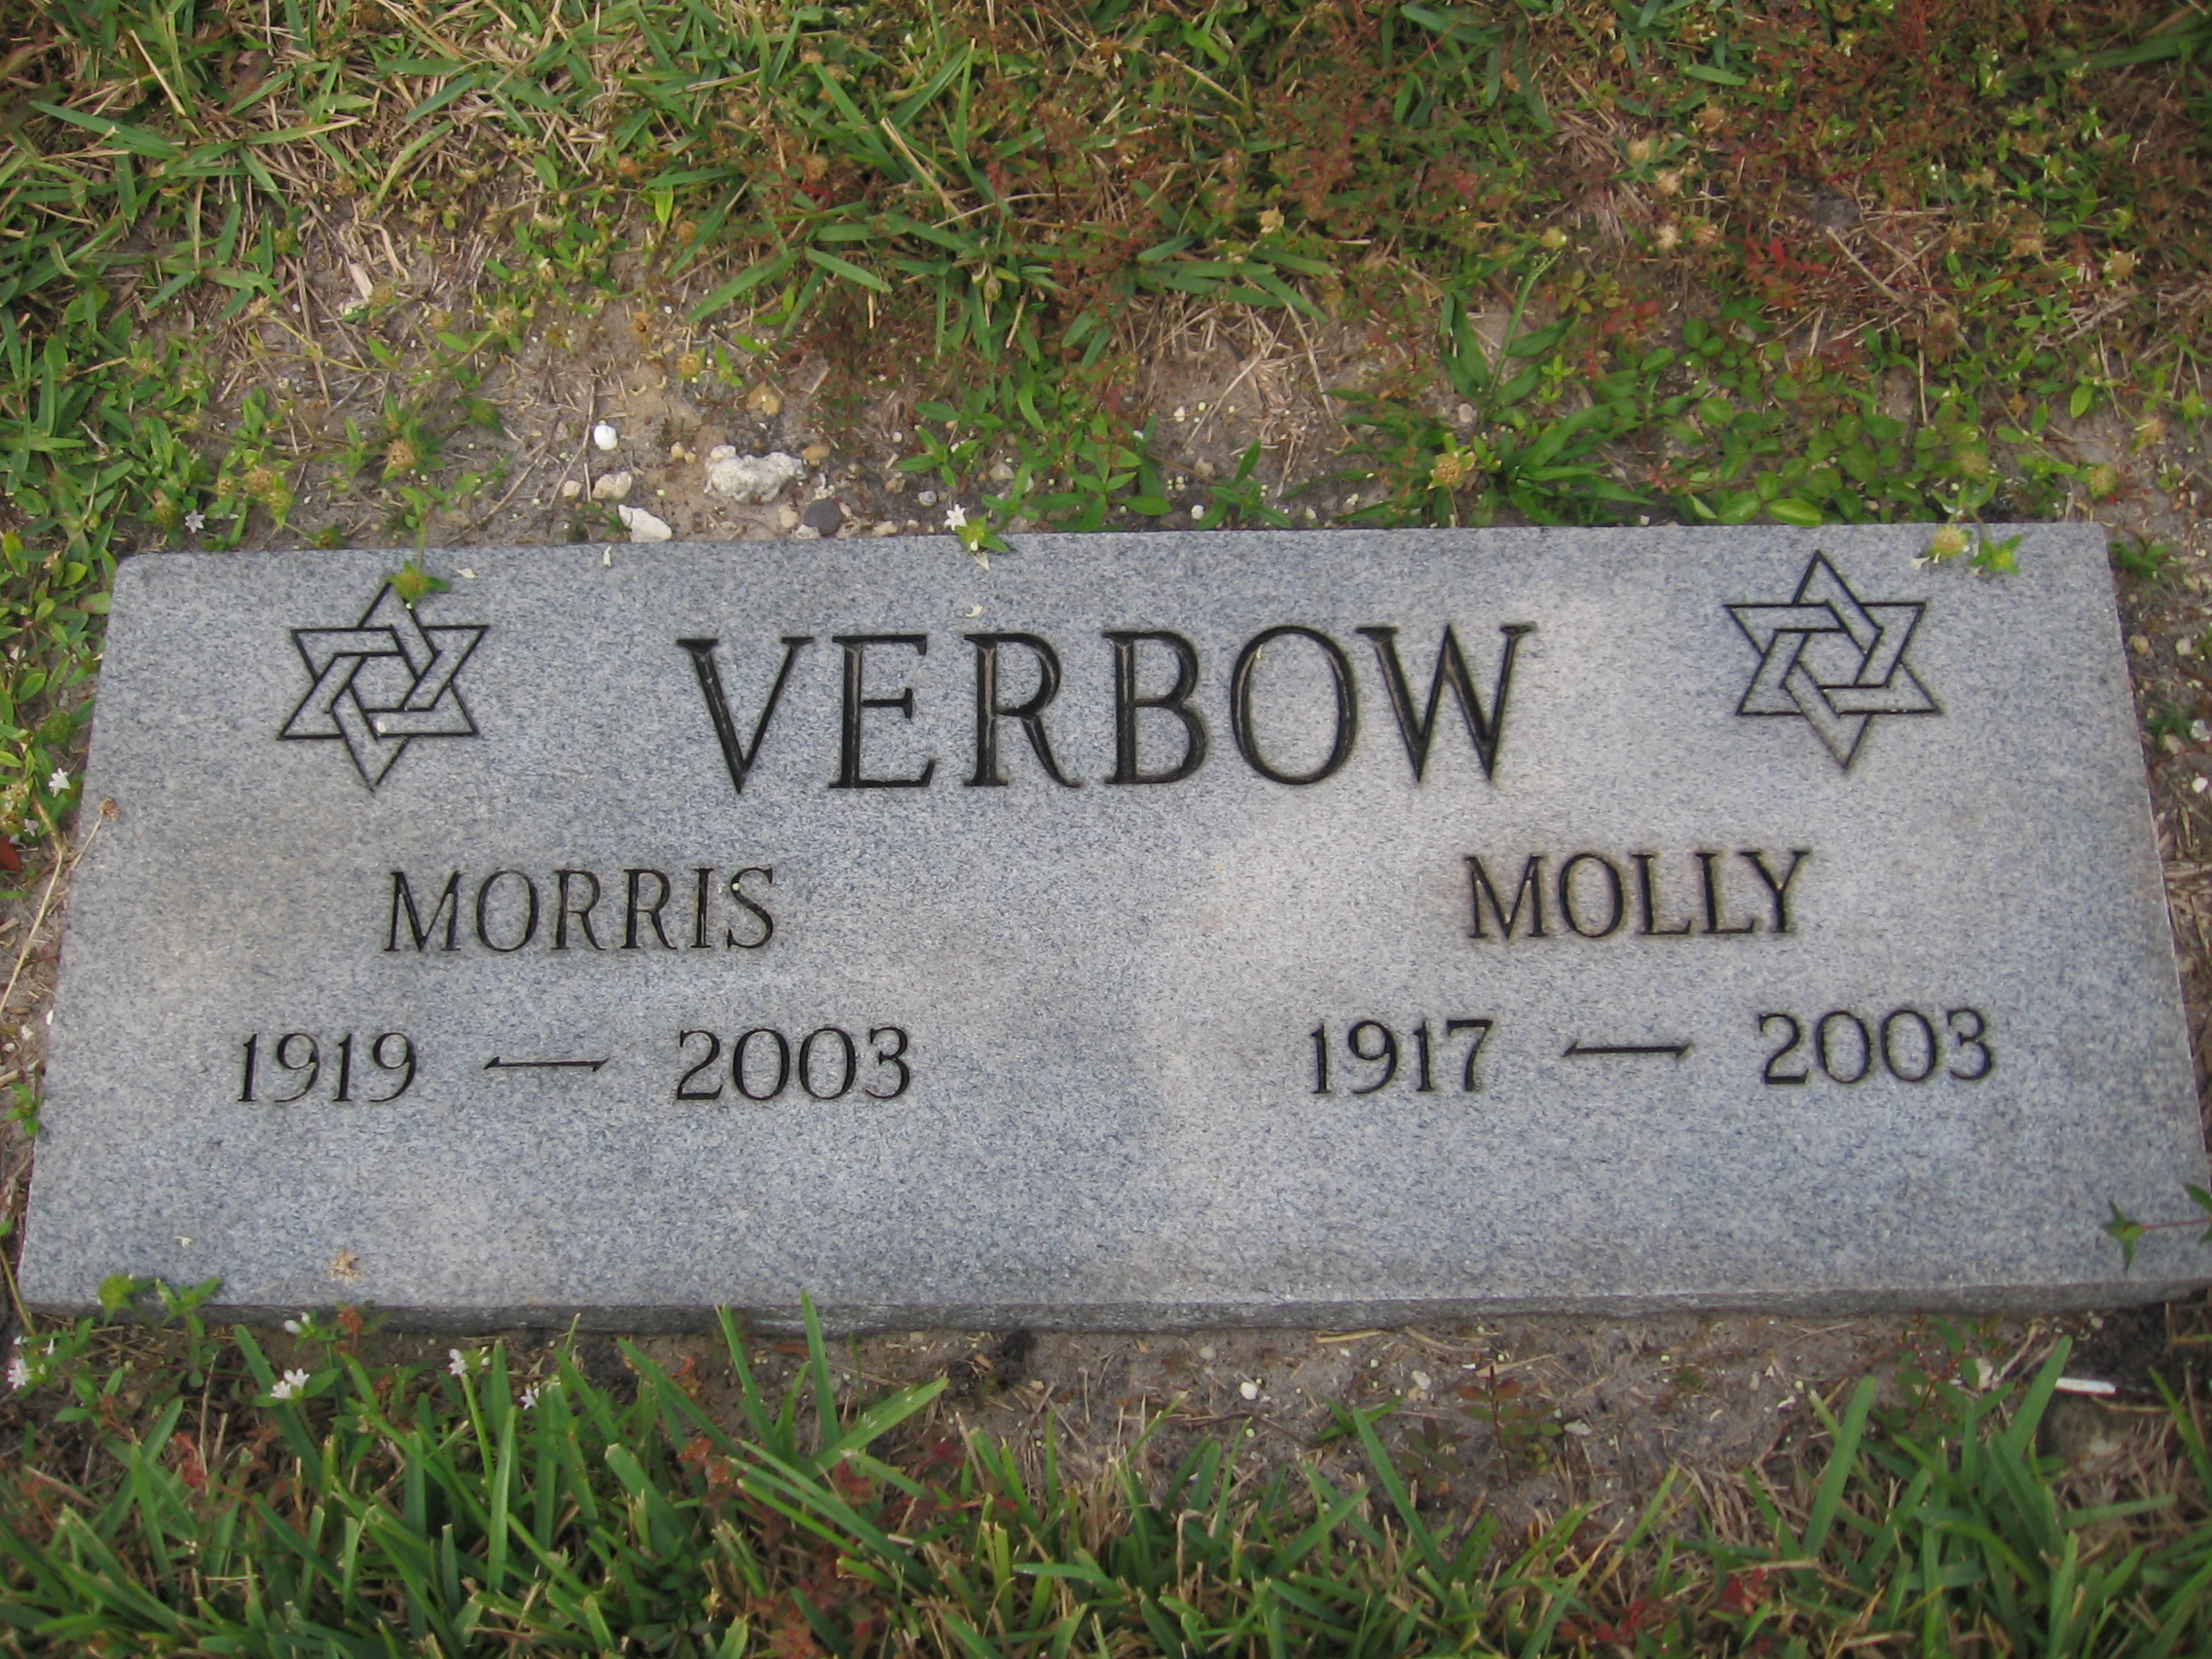 Molly Verbow